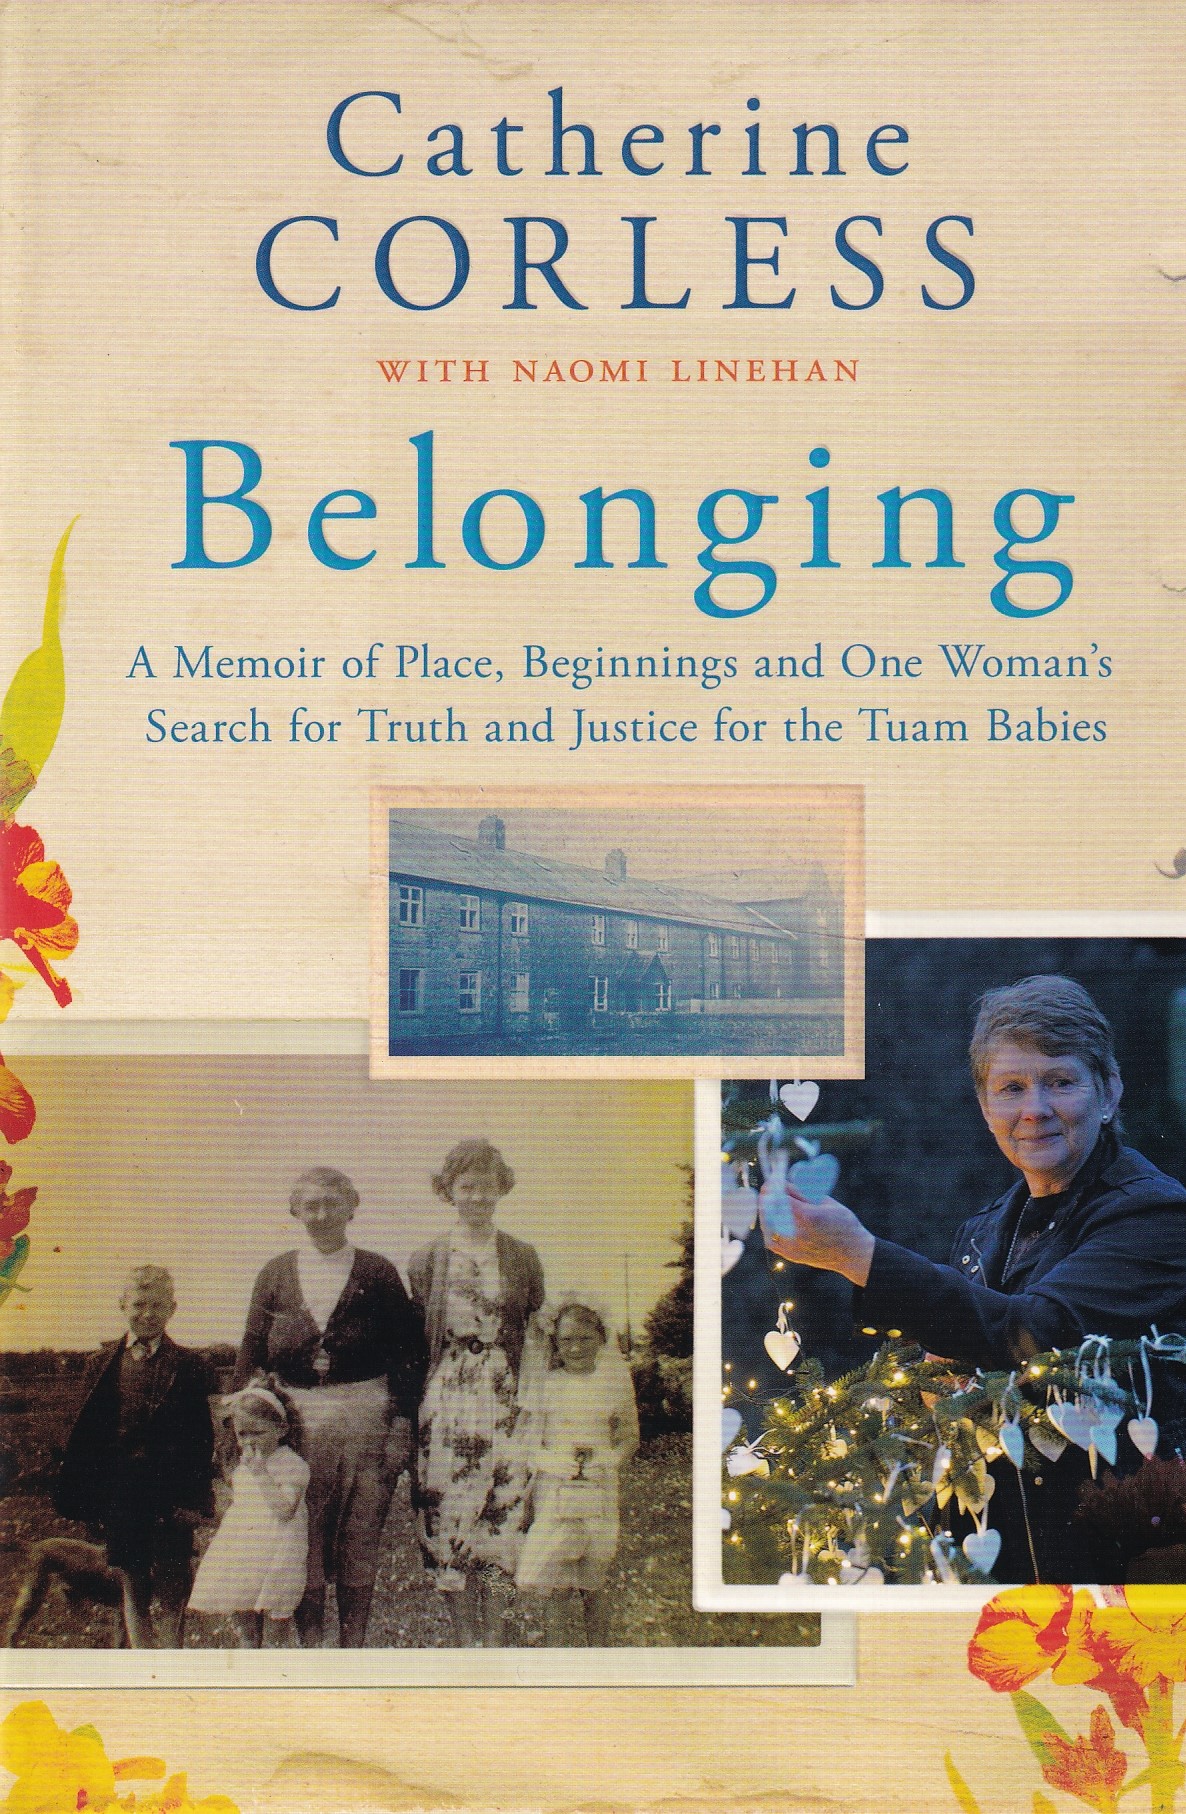 Belonging: A Memoir of Place, Beginnings and One Woman’s Search for Truth and Justice for the Tuam Babies by Catherine Corless